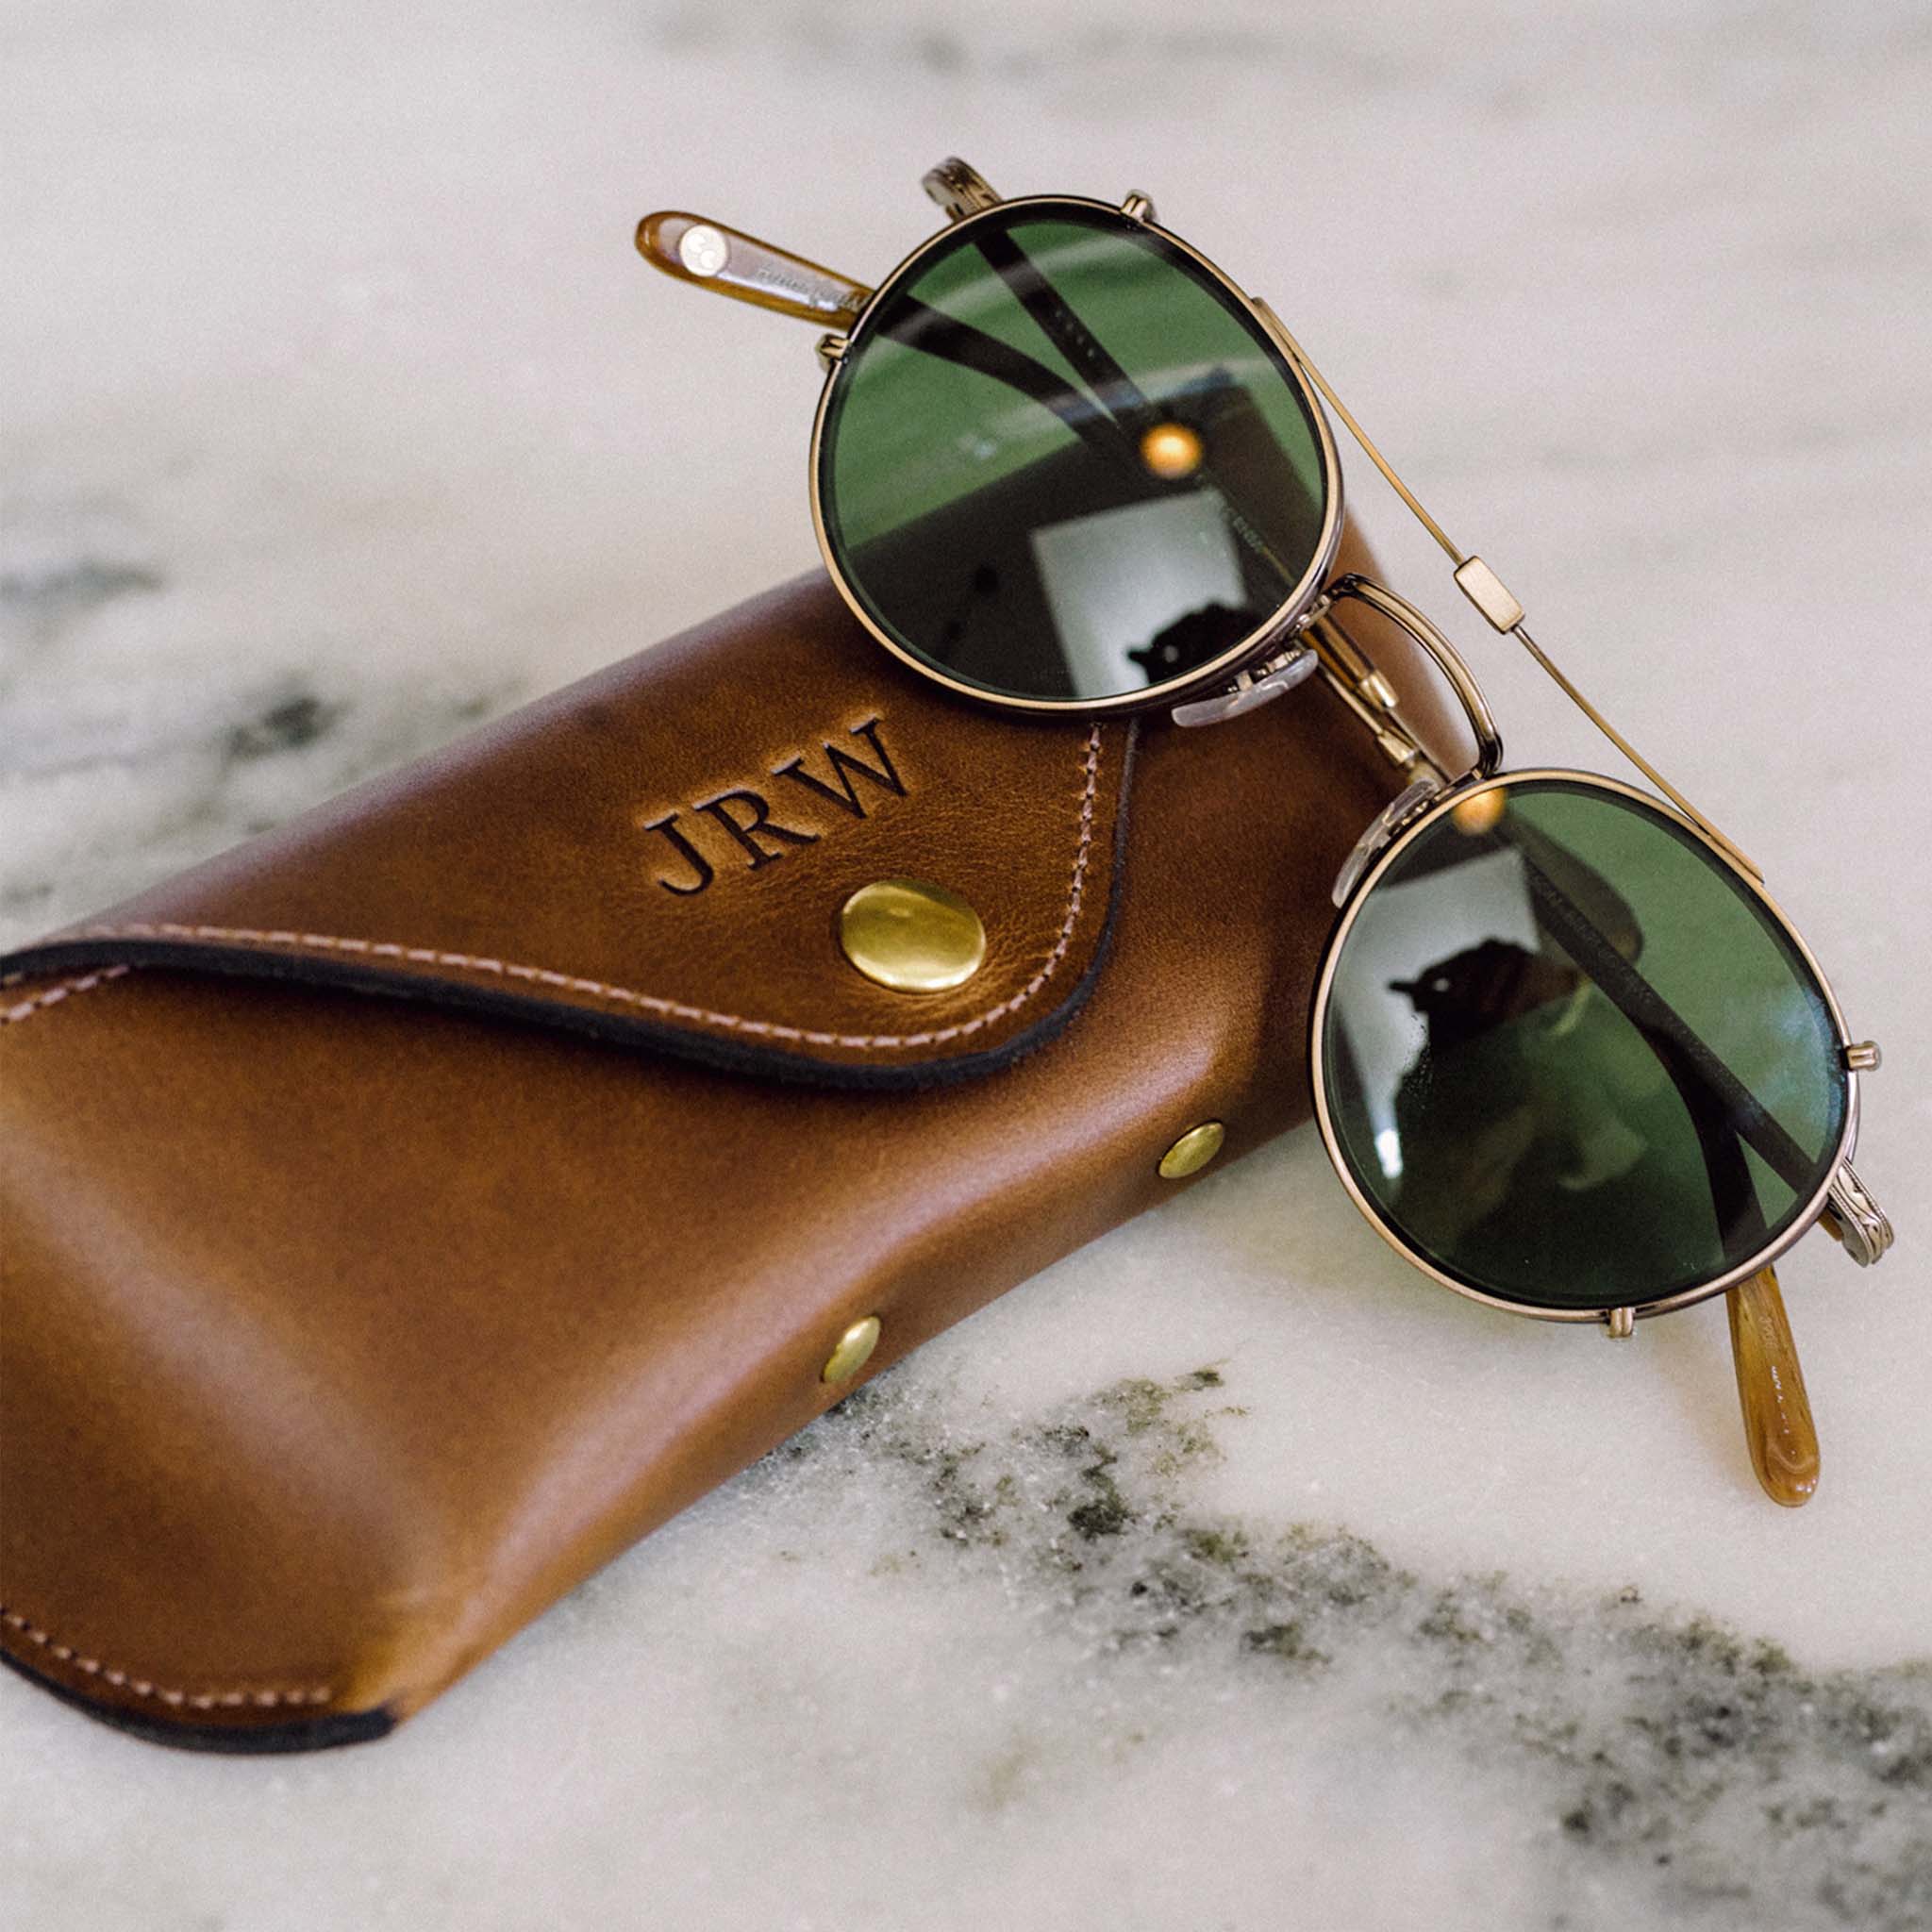 Ray-Ban Upgrades the Round Craft Sunglasses With Hints of Leather - Airows